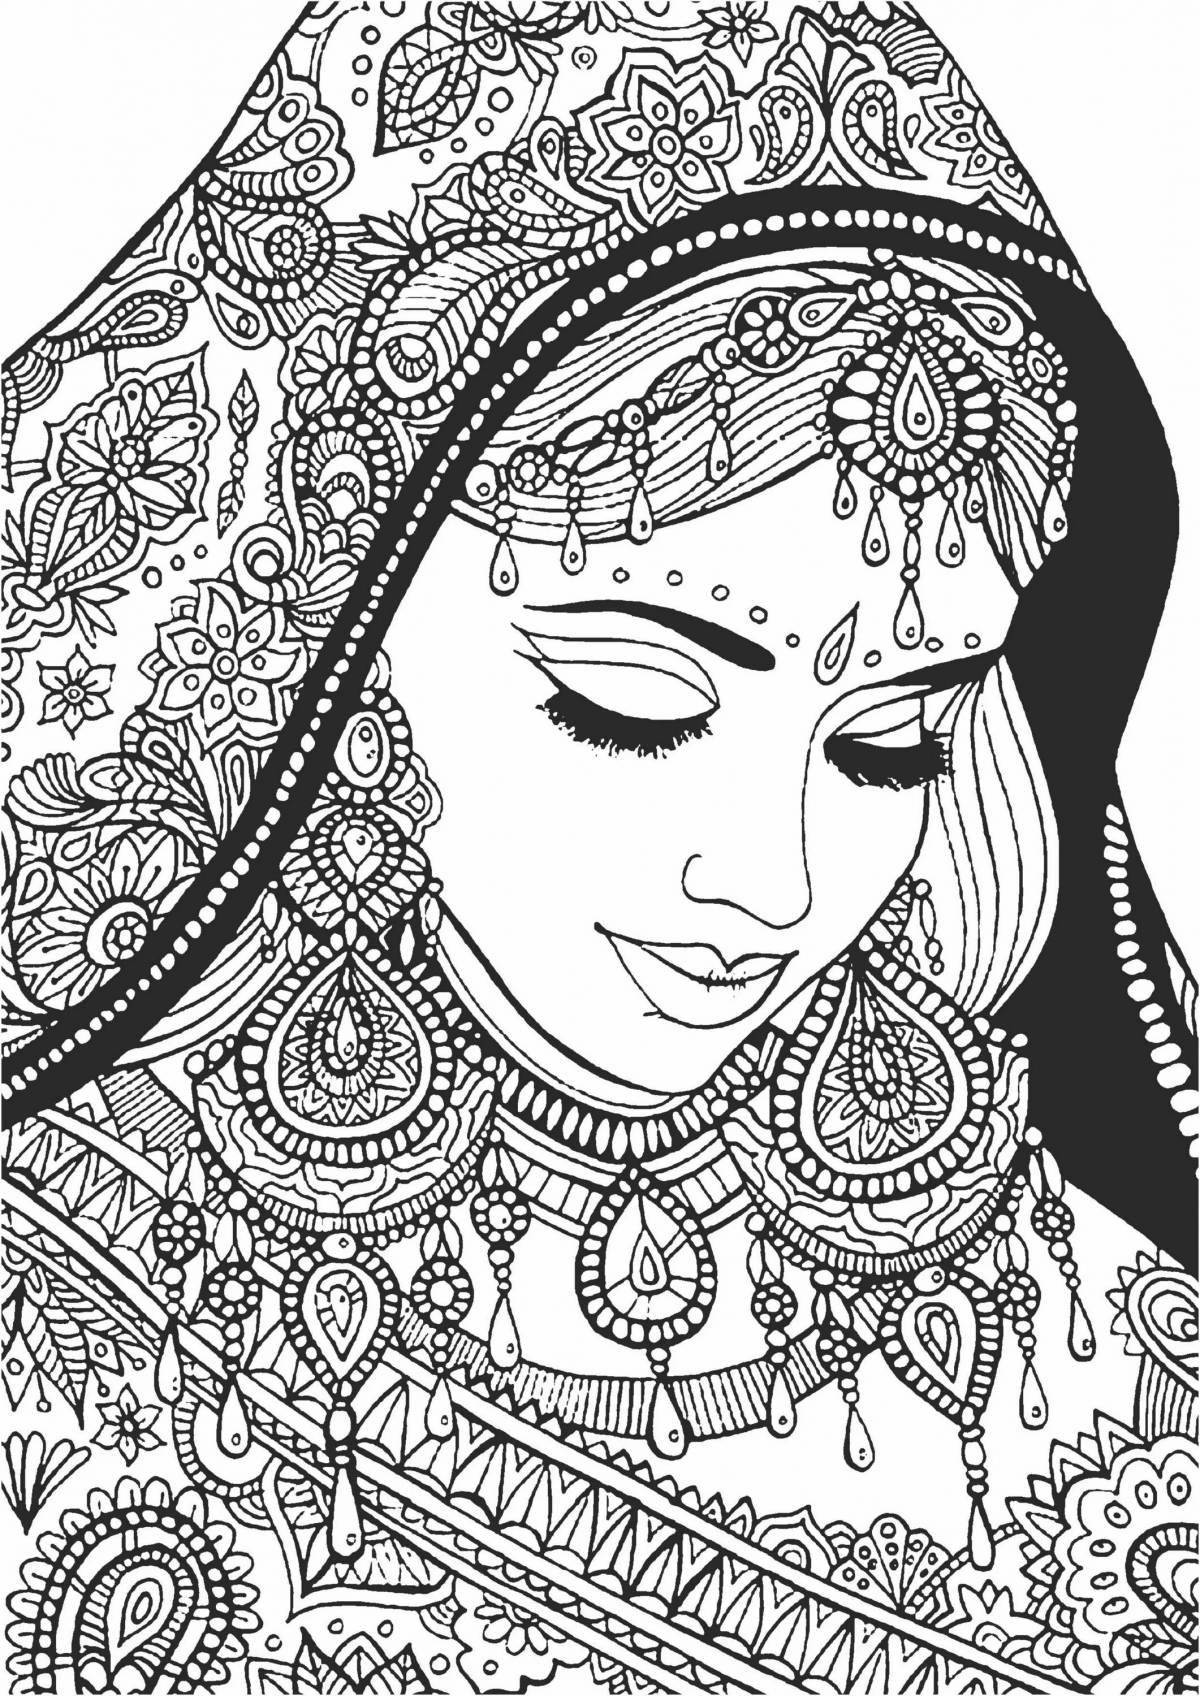 Anti-stress coloring book for women